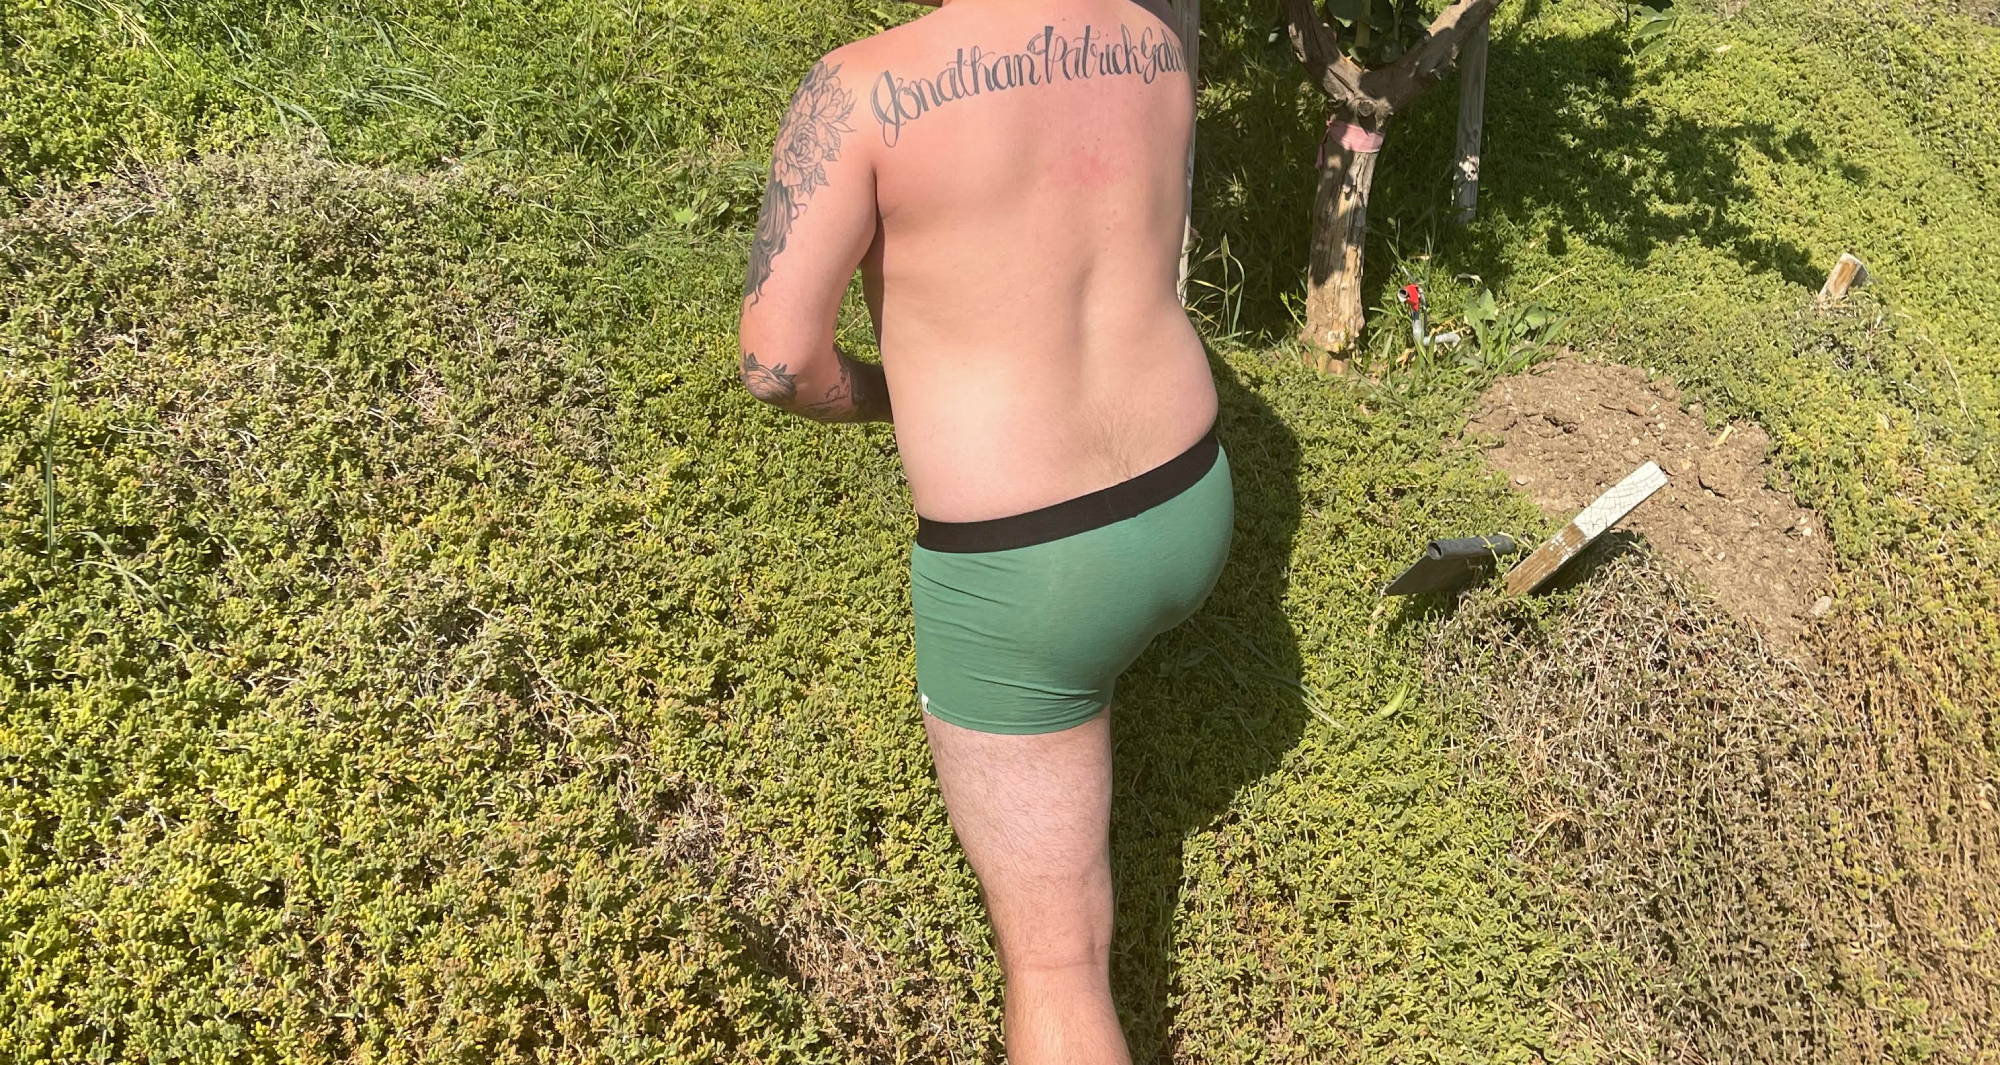 a man in green trunks underwear and a black cowboy hat from the back